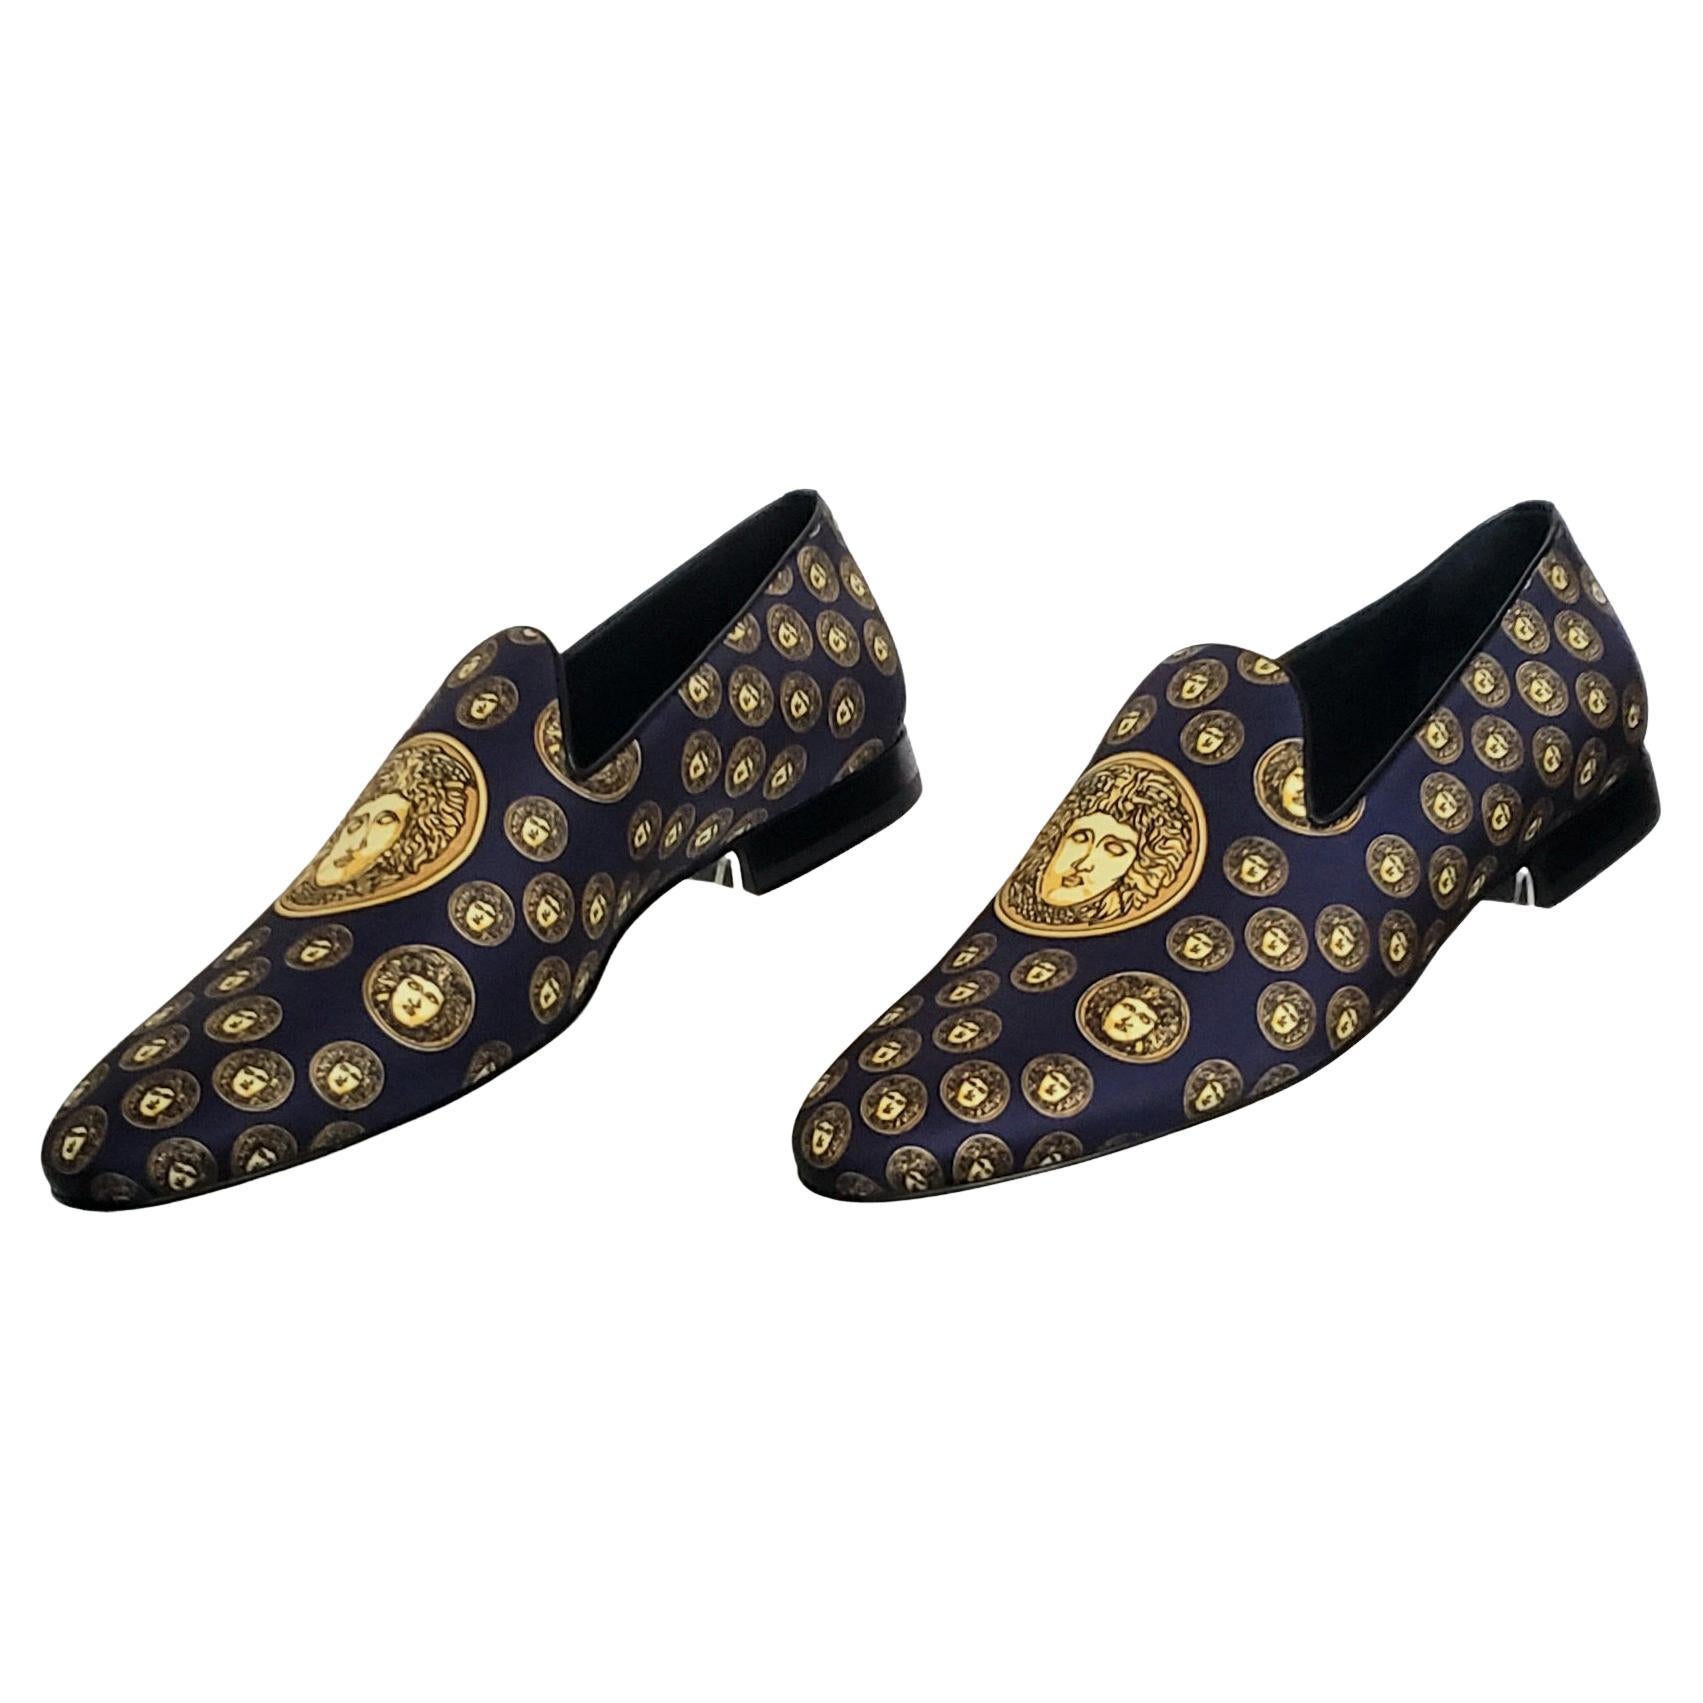 SOLD OUT!!! NEW VERSACE NAVY BLUE SILK LOAFERS w/GOLD MEDUSA PRINT Sz 11 For Sale